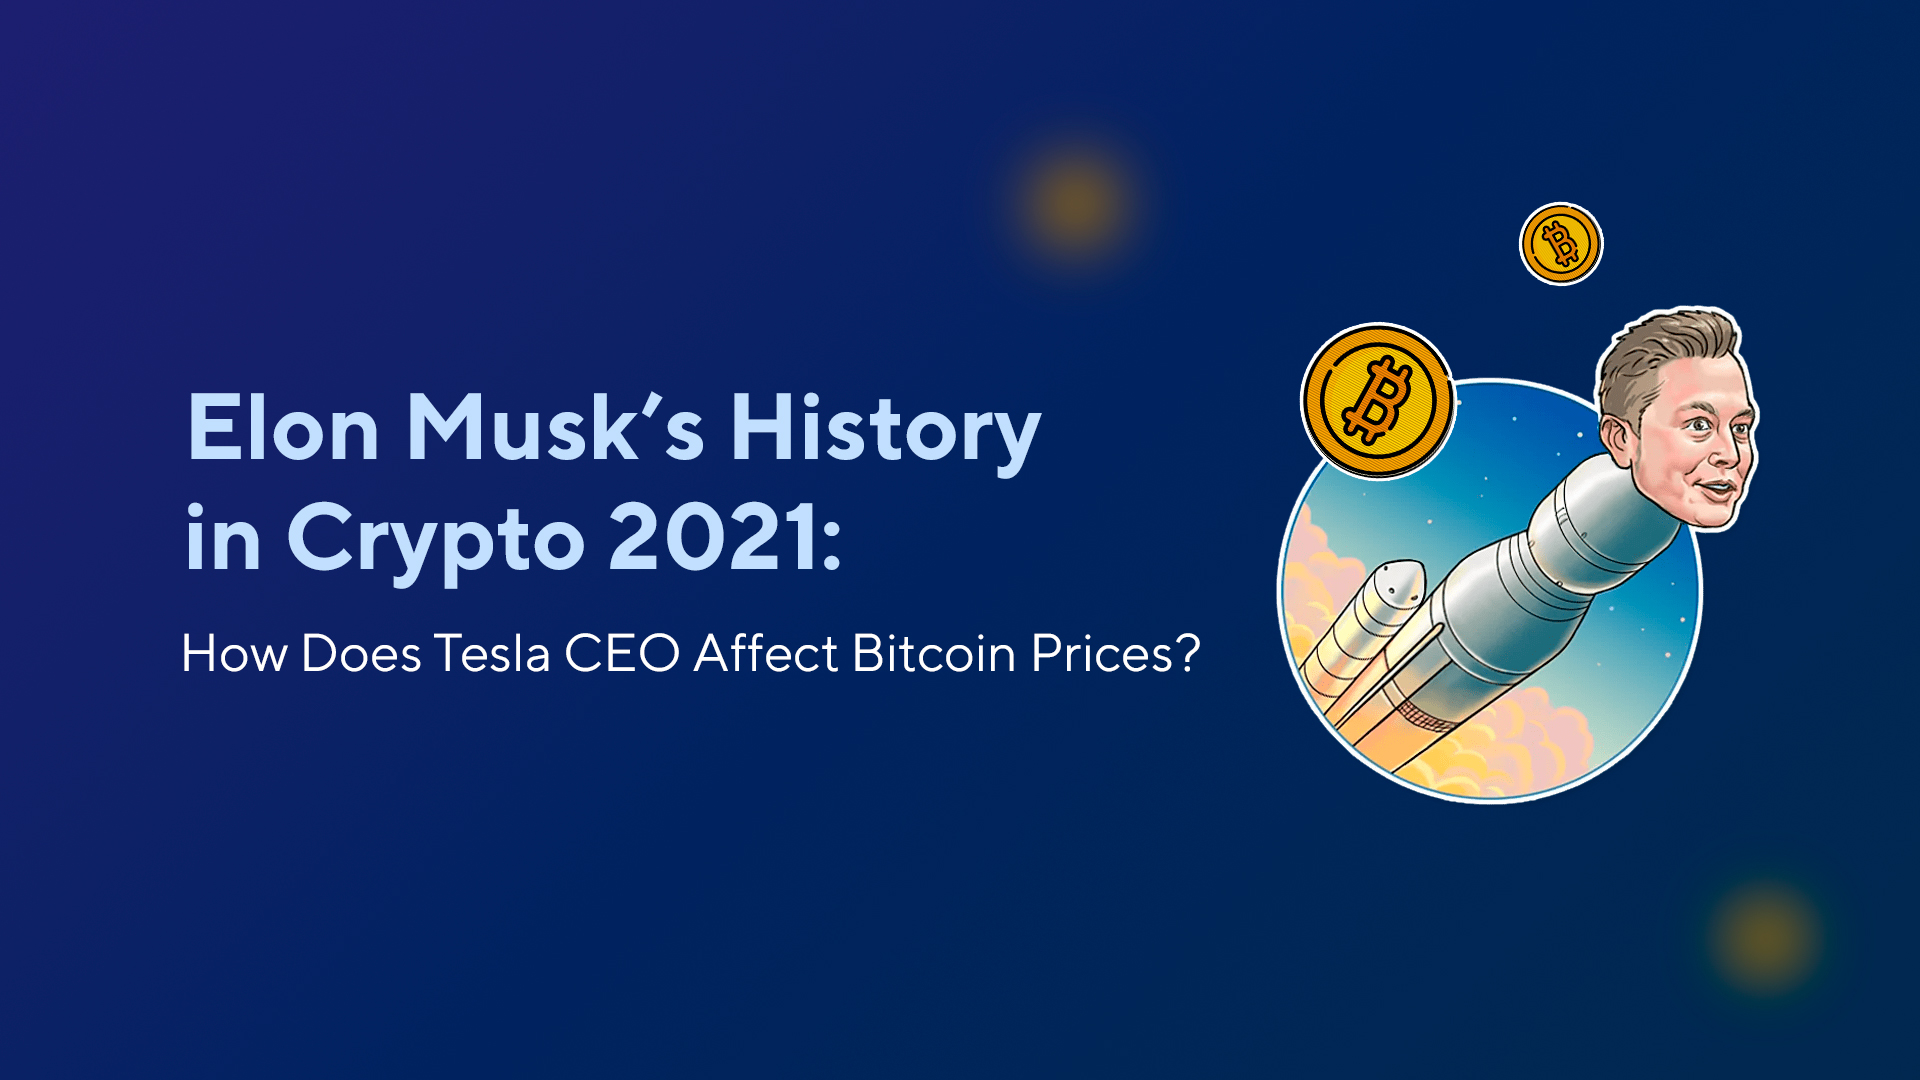 Elon Musk’s History in Crypto 2021: How Does Tesla CEO Affect Bitcoin Prices?